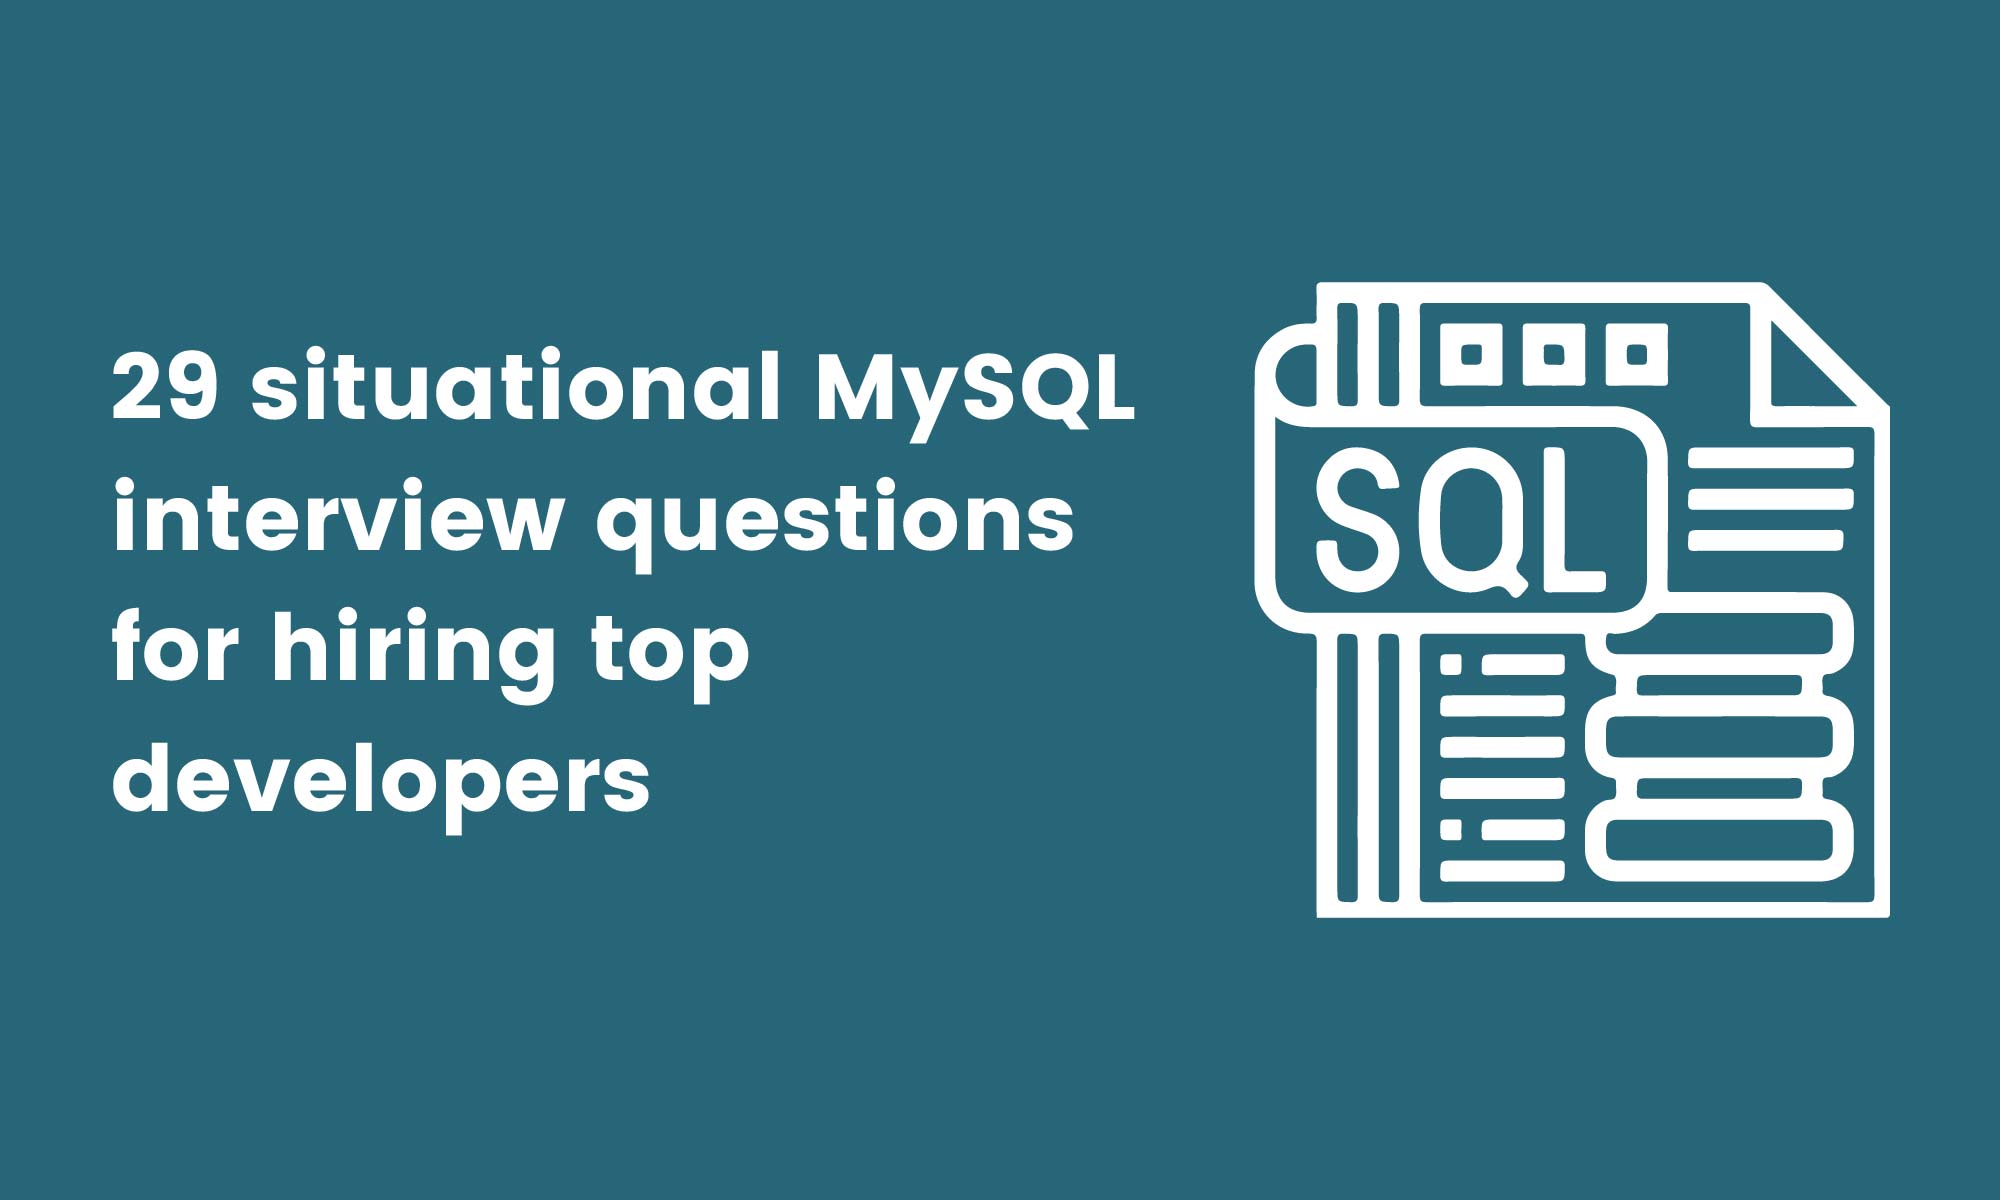 29 situational MySQL interview questions for hiring top developers